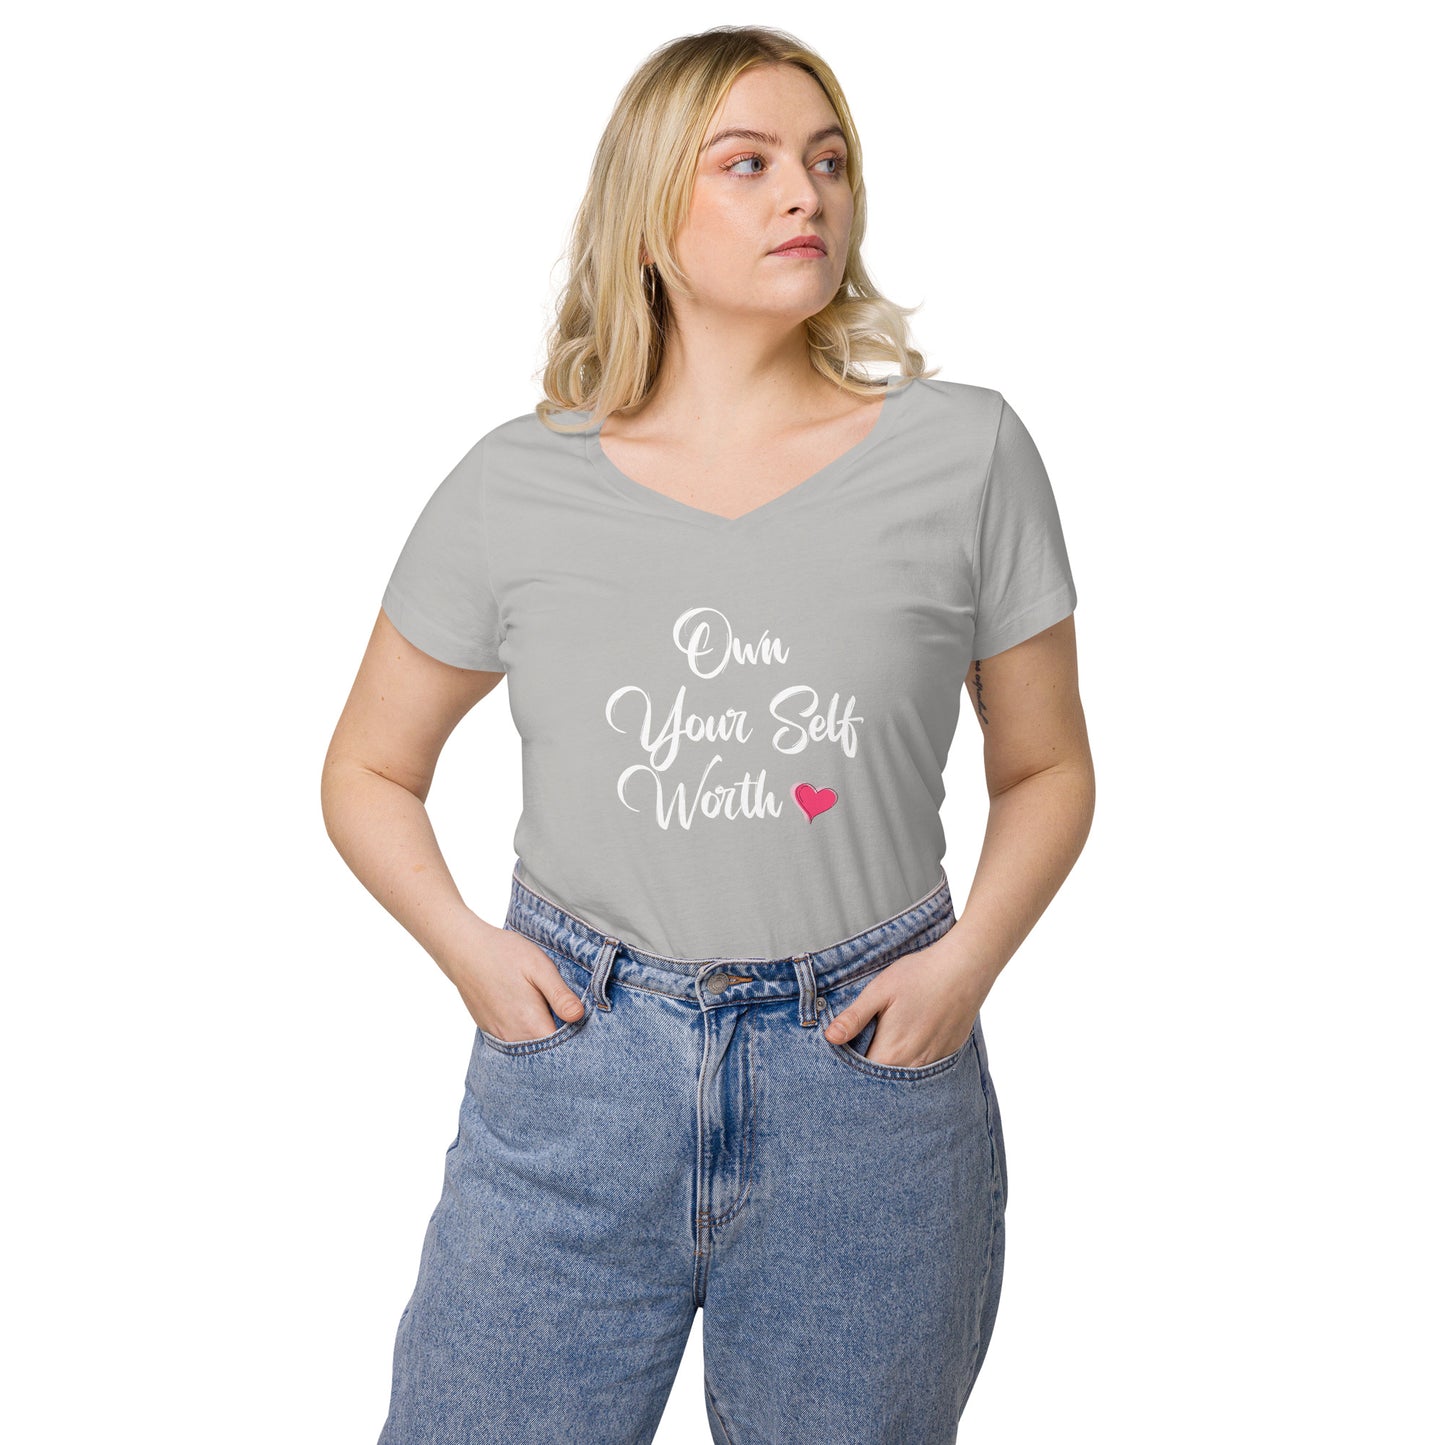 Own your self worth v-neck t-shirt